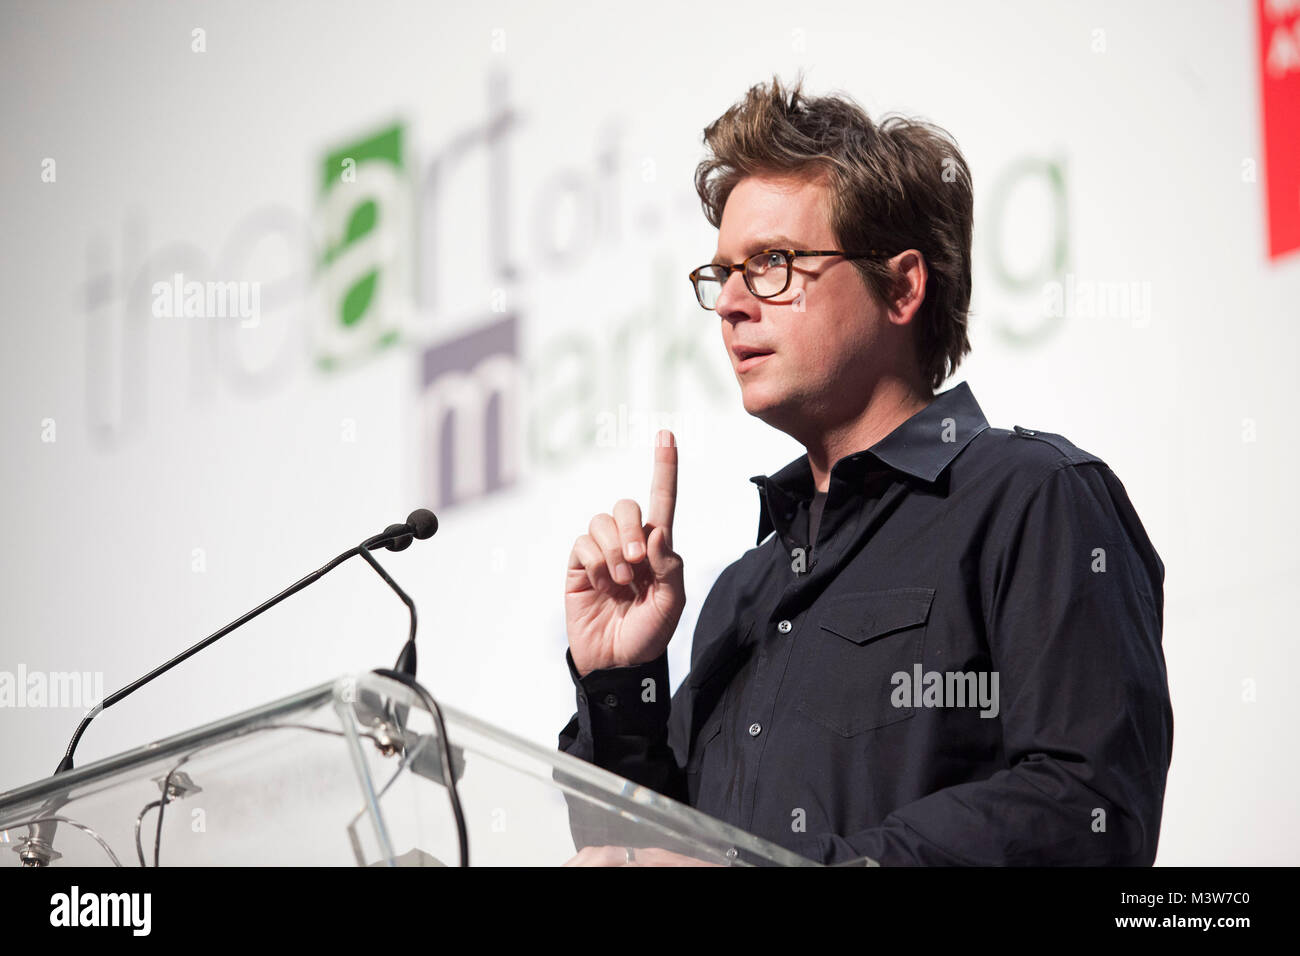 Co-founder and Creative Director of Twitter Inc Biz Stone speaks at the Art of Marketing conference in Toronto, Ontario, Canada on Wednesday, June 05, 2013. The conference hosted speakers and vendors geared towards the new age of marketing. Stock Photo